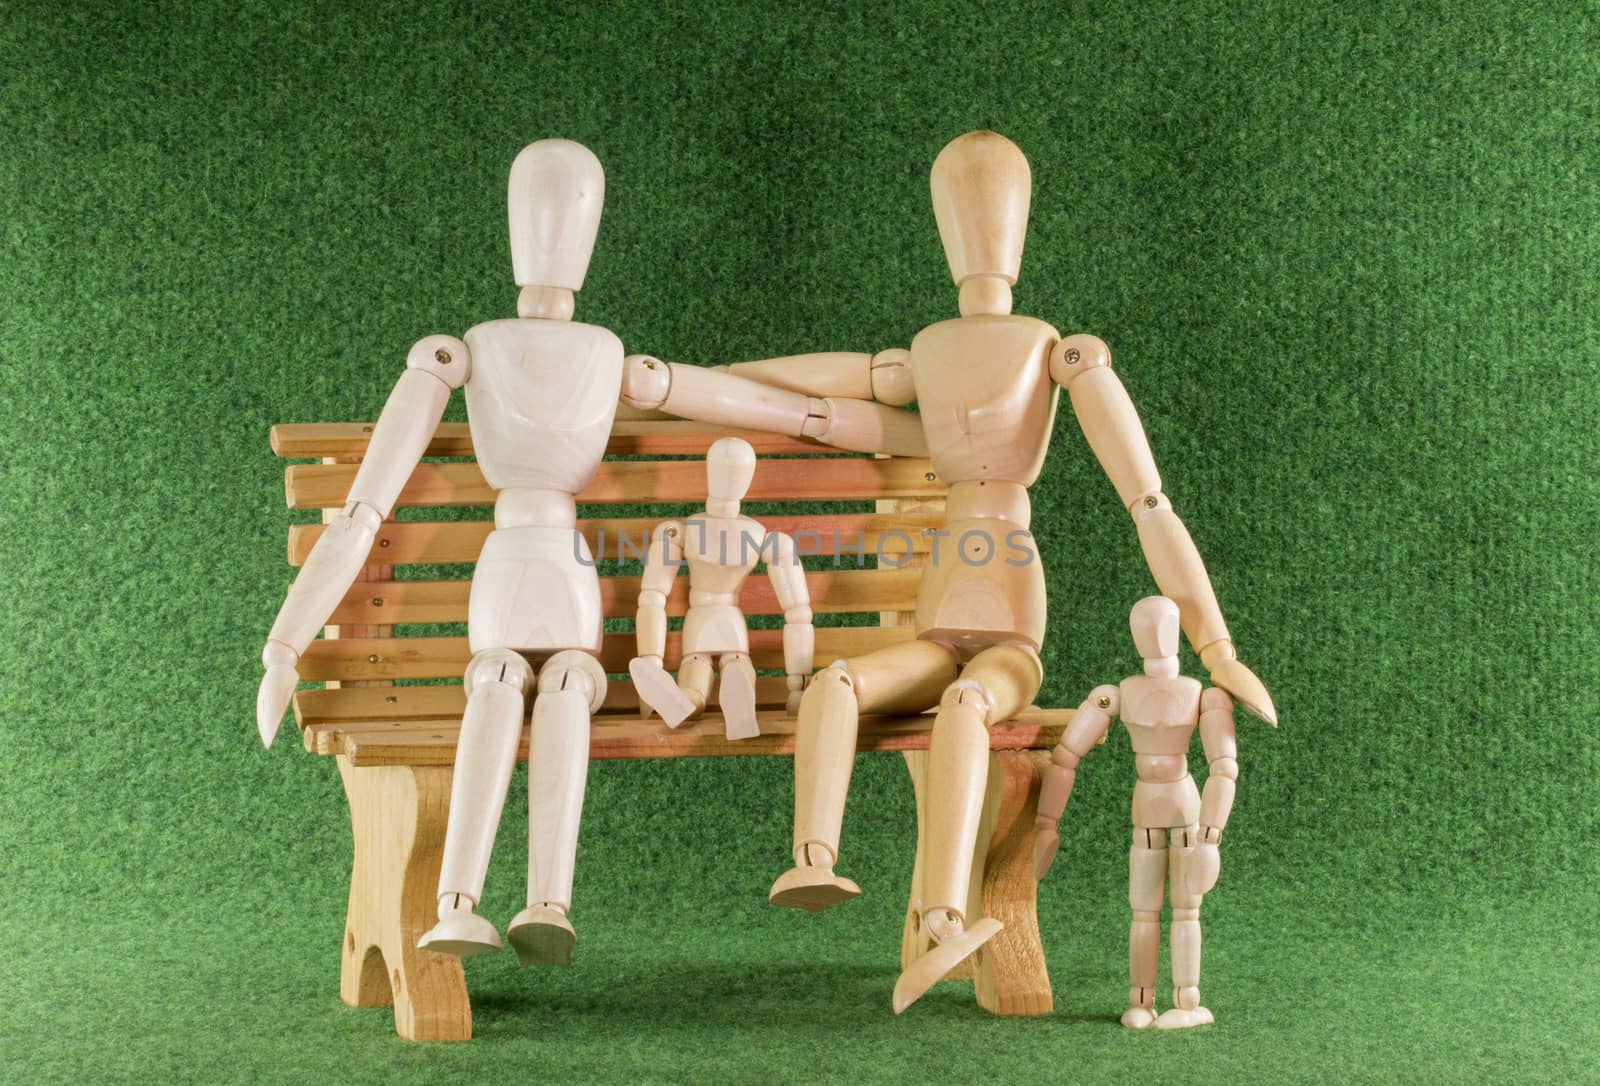 wooden toys as family on bench by compuinfoto